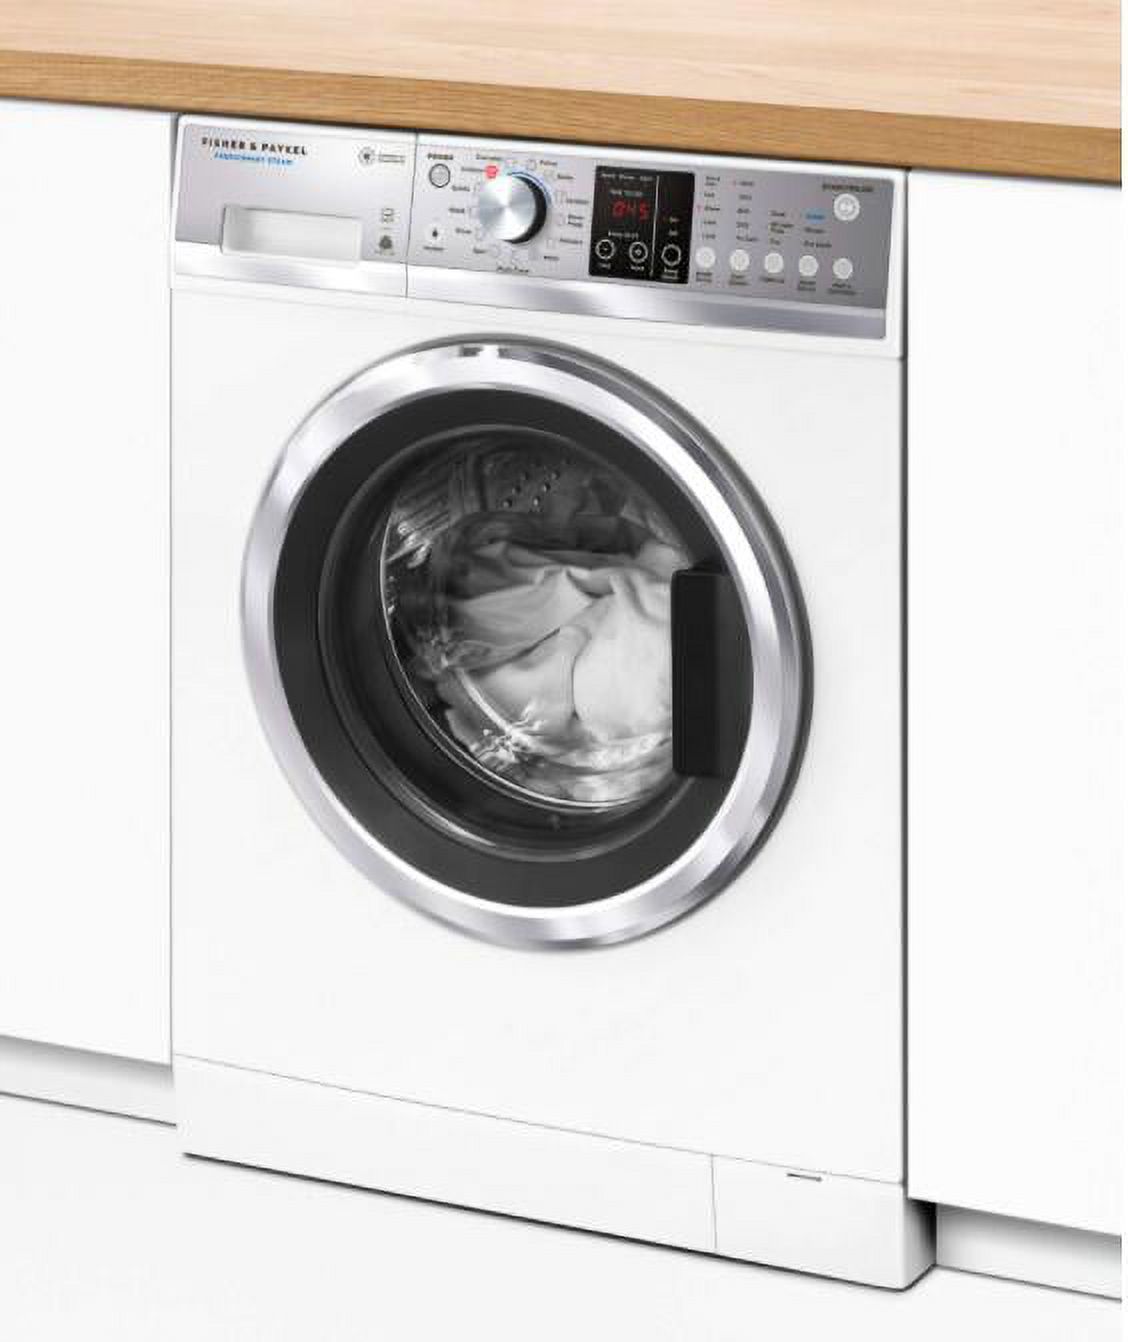 Fisher & Paykel WashSmart WH2424F1 - Washing machine - width: 23.6 in - depth: 25.4 in - height: 33.5 in - front loading - 2.4 cu. ft - 1400 rpm - white - image 2 of 7